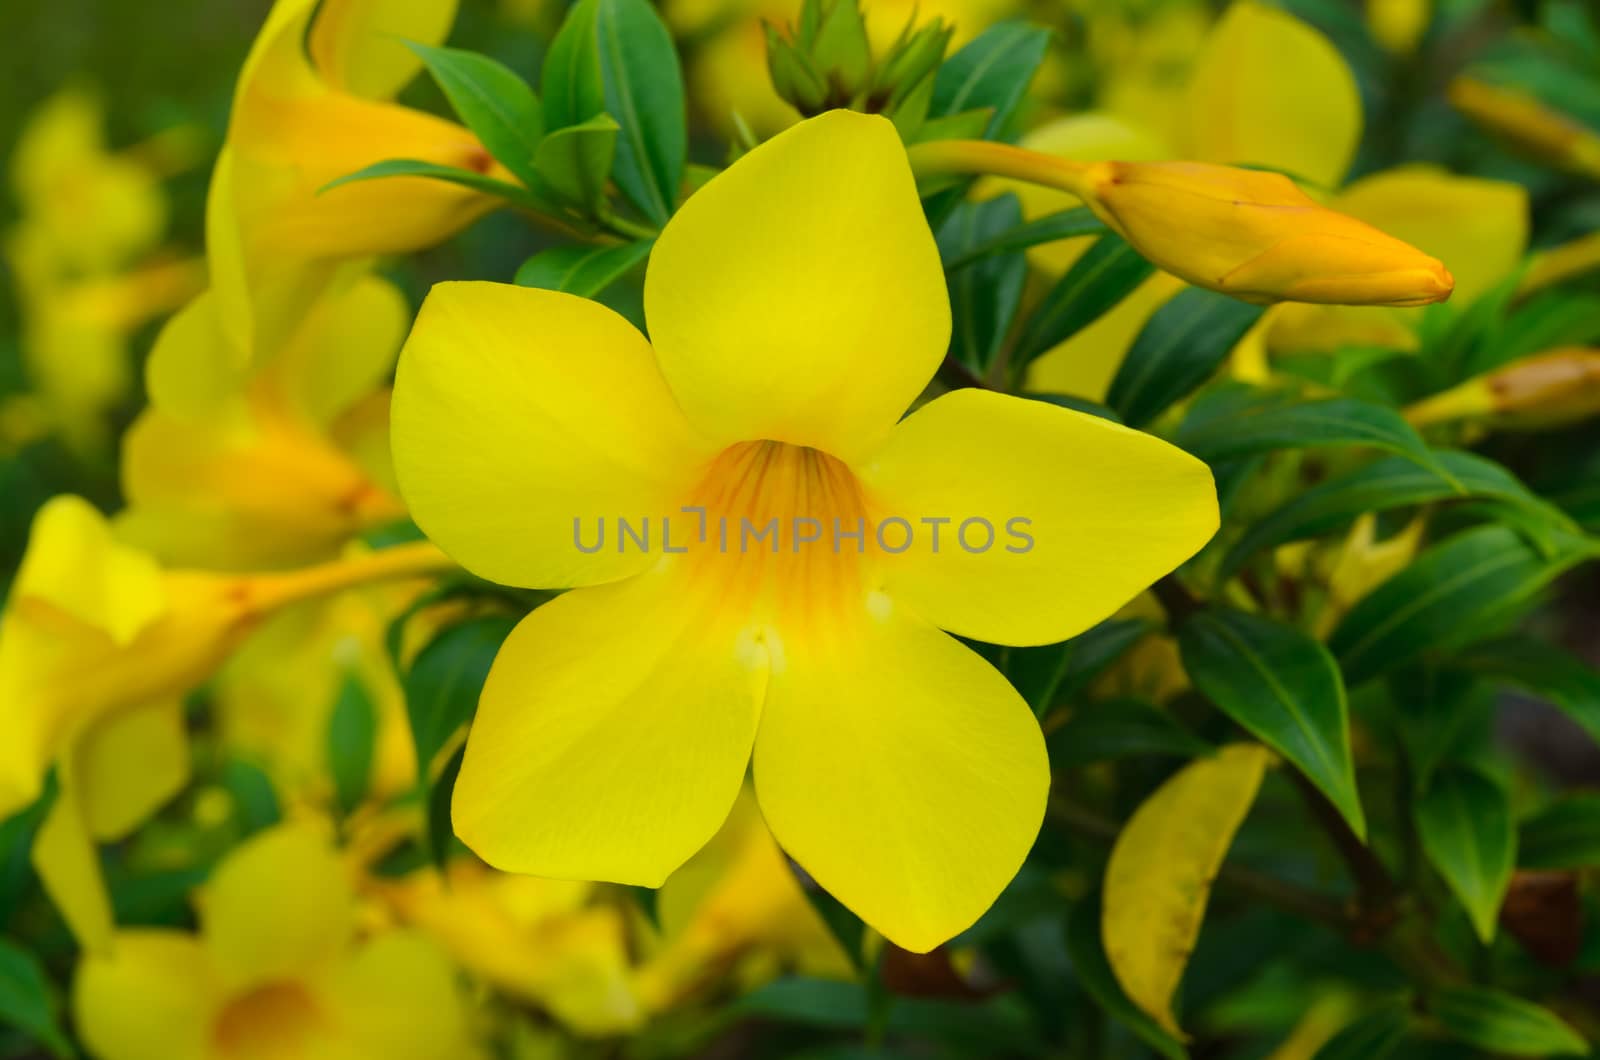 closeup of Allamanda Cathartica flowers in the garden,
shot with natural light